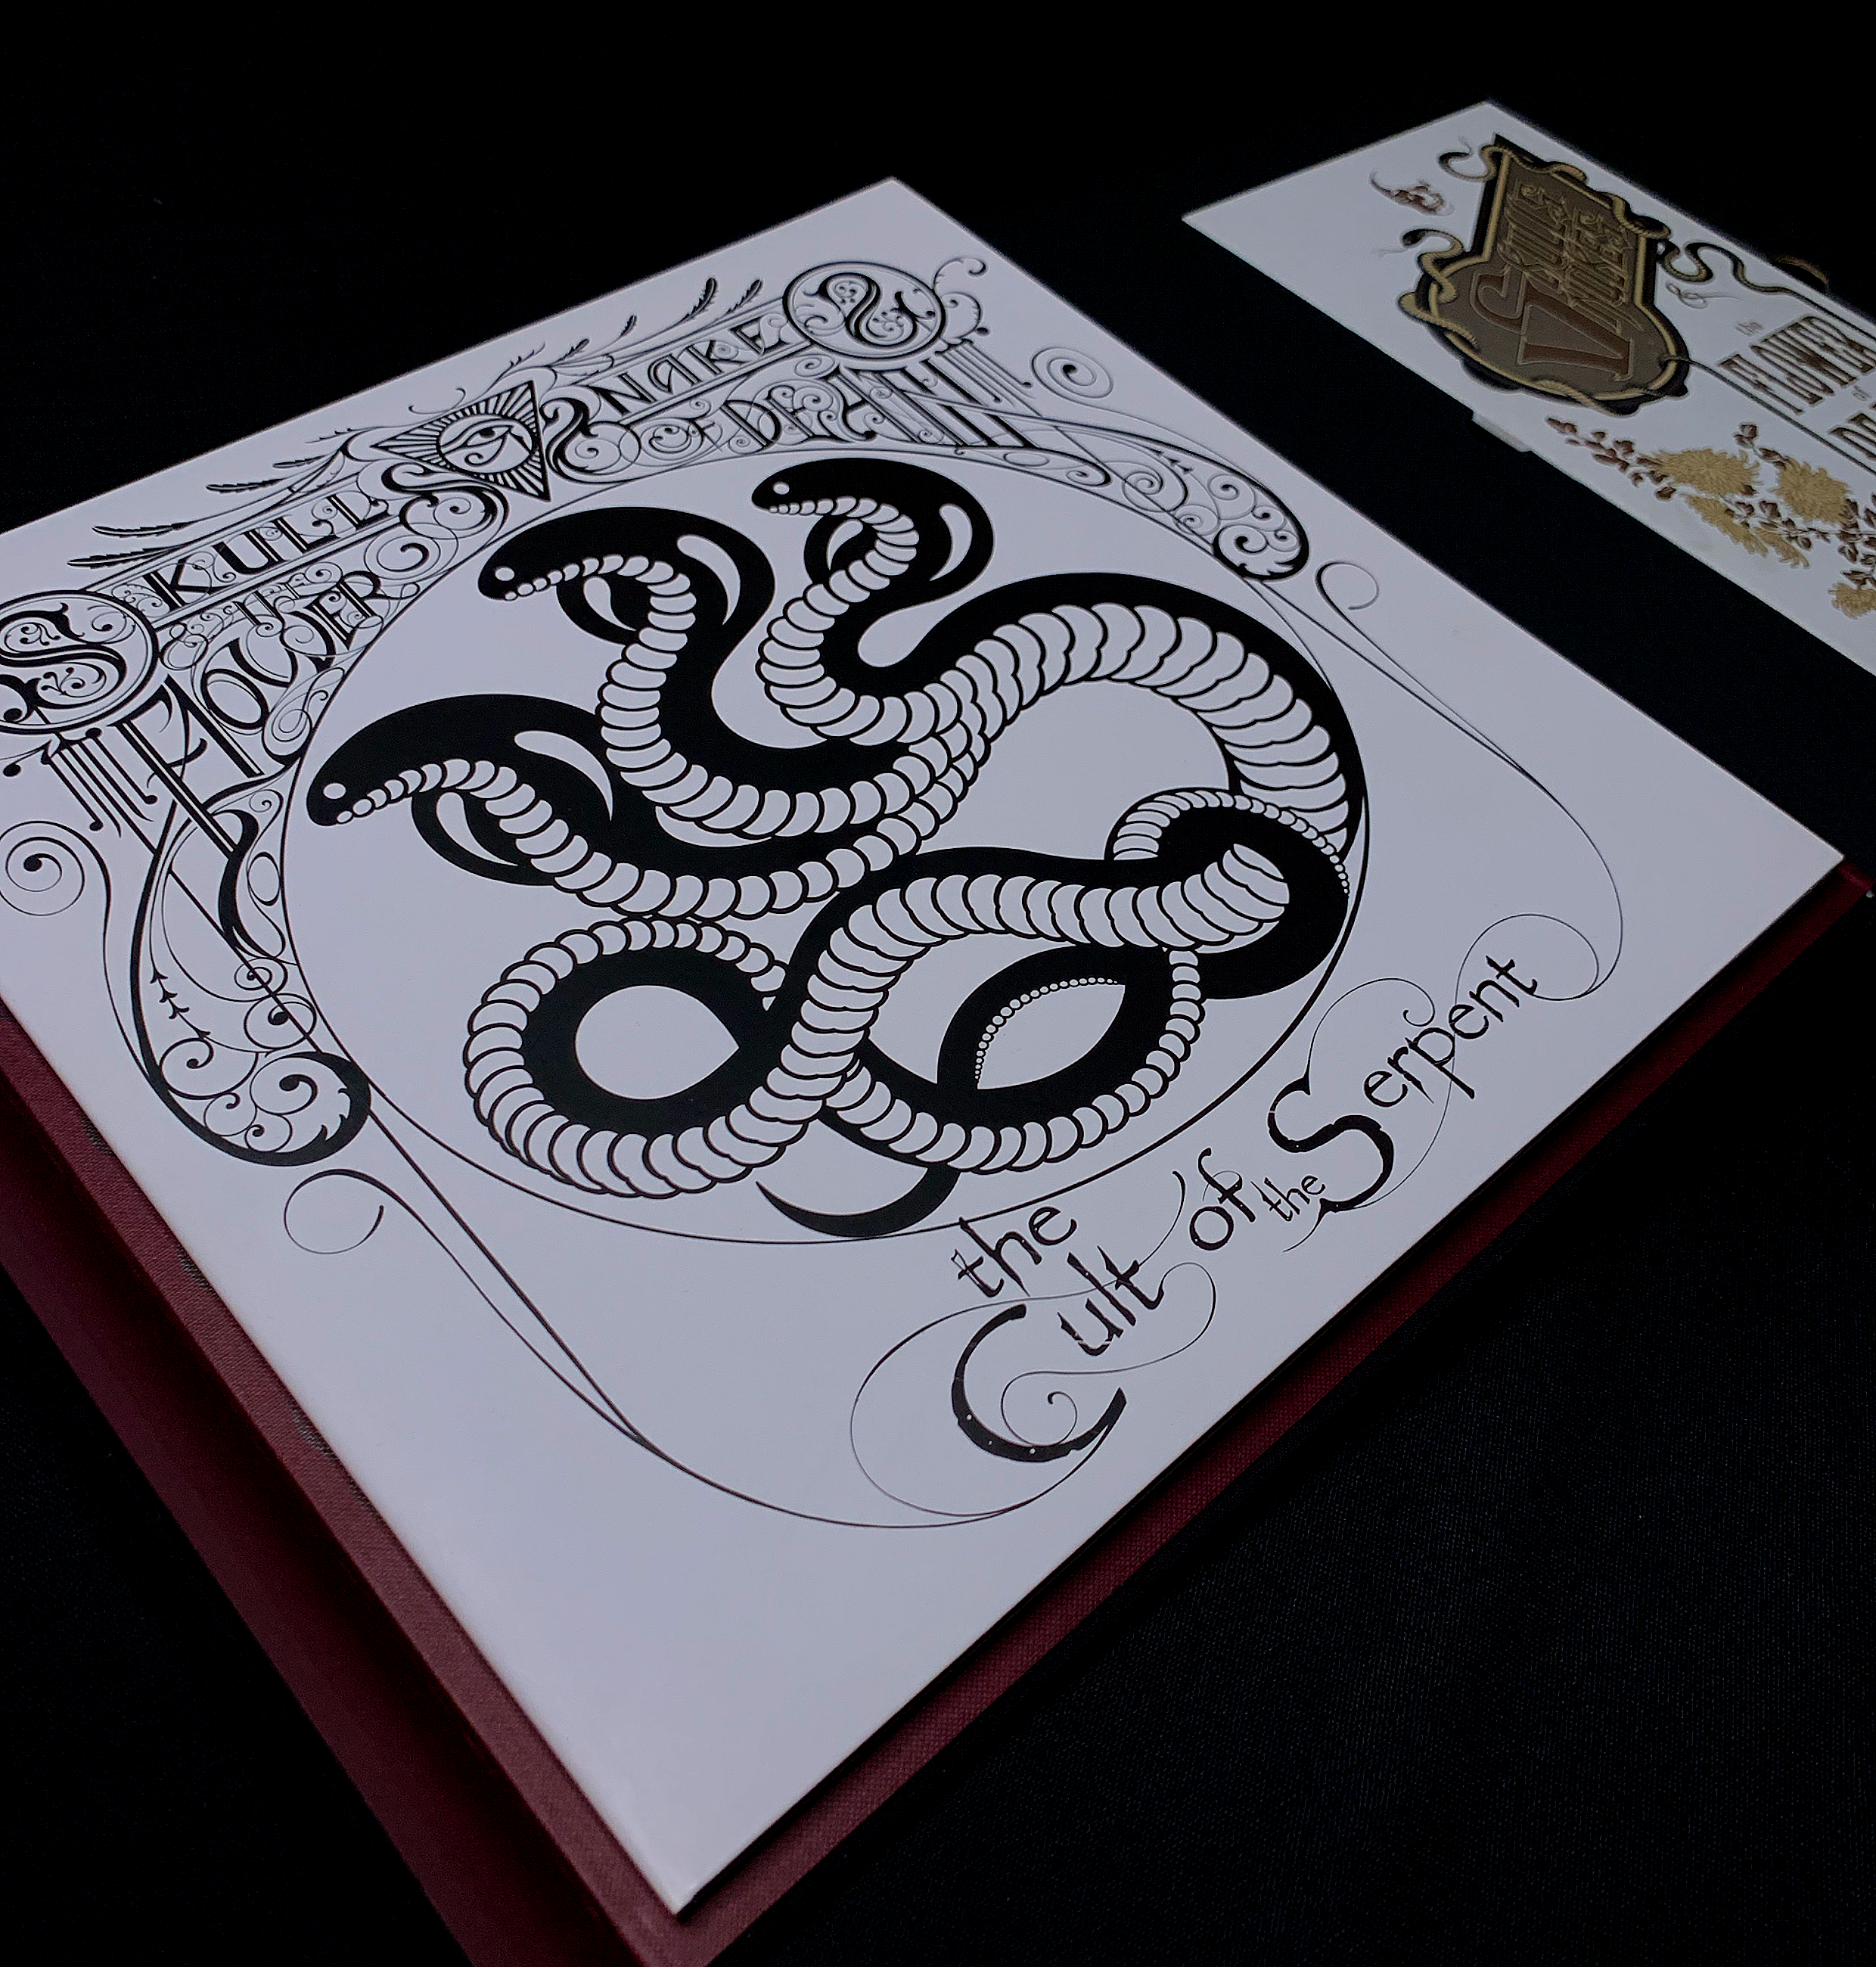 Book + Vinyl Clamshell Box Set: Skull Snakes and the Flower of Death 2